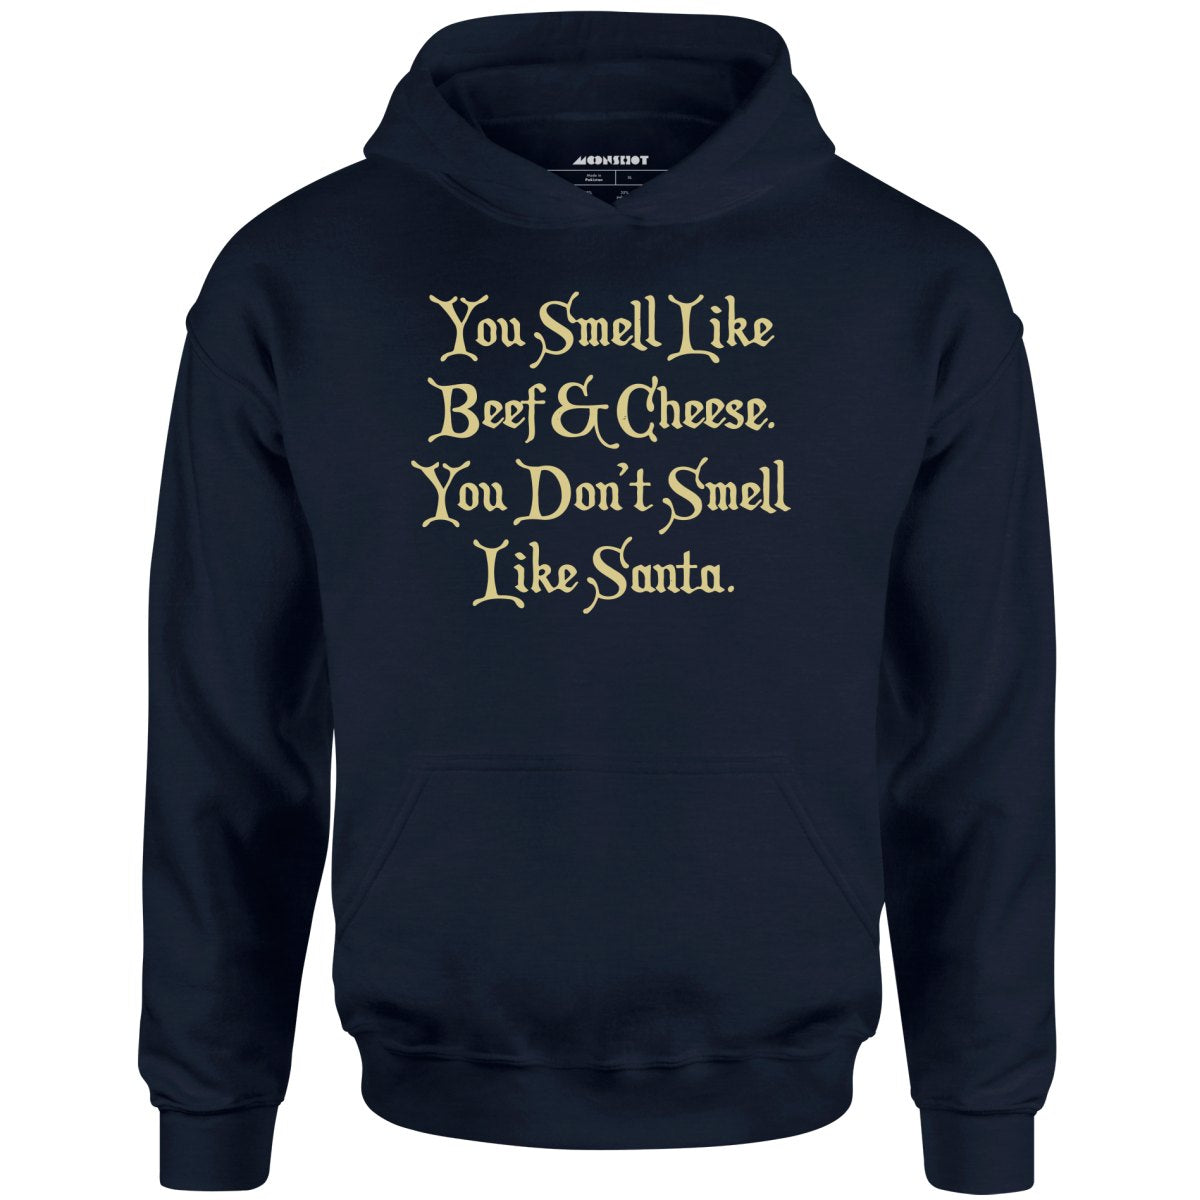 You Don't Smell Like Santa - Unisex Hoodie